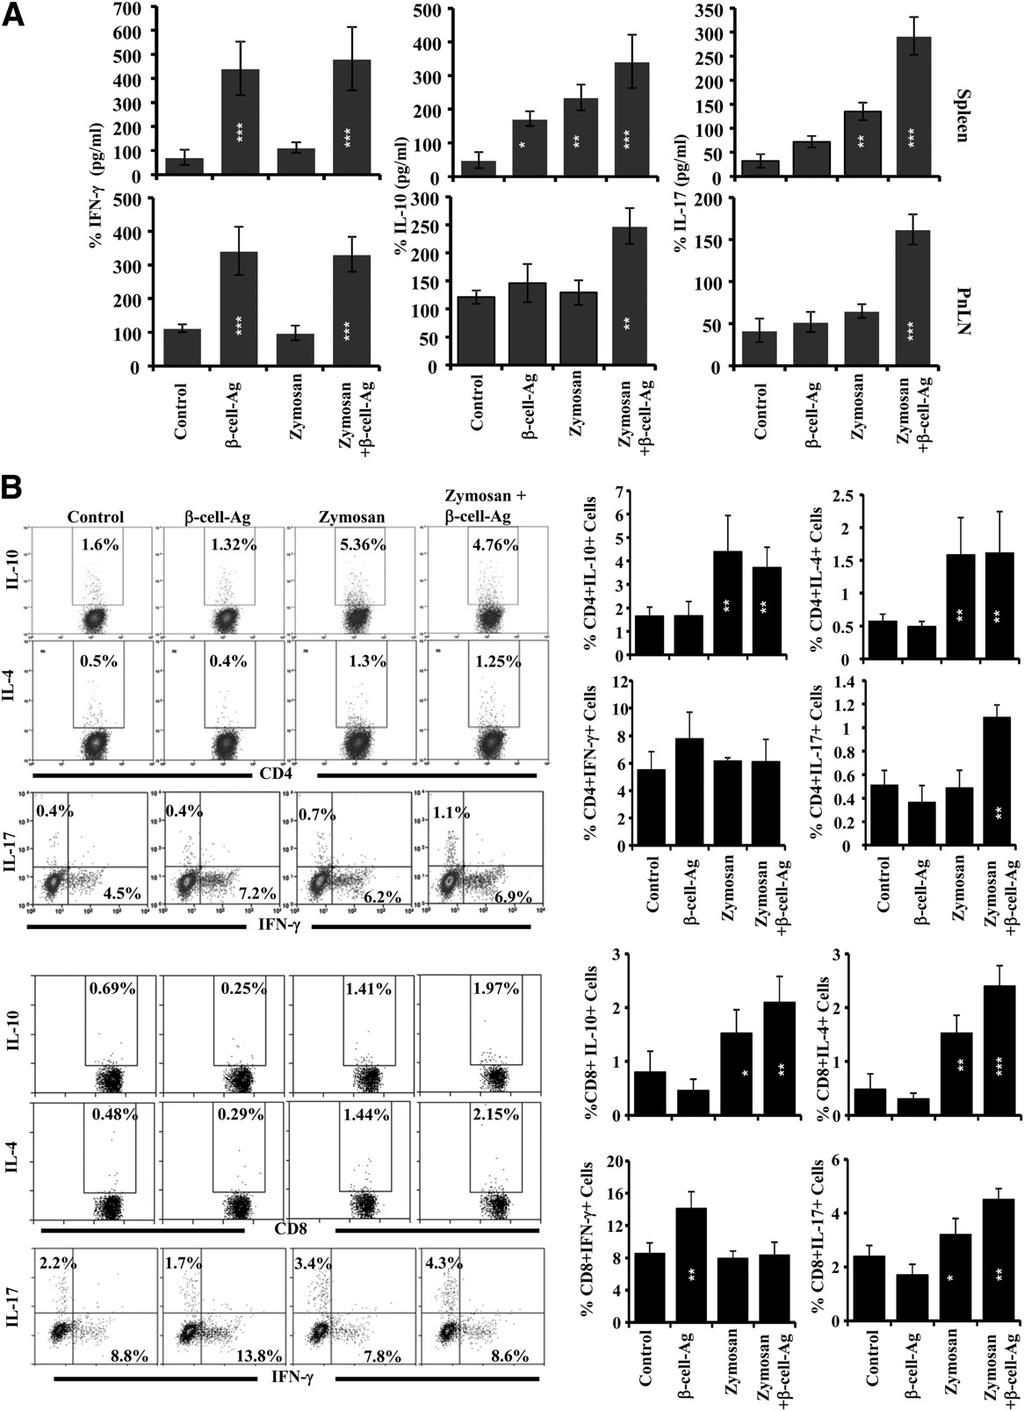 1352 Immune Regulation Through TLR2 and Dectin 1 Diabetes Volume 64, April 2015 Figure 7 Treatment using zymosan and b-cell-ag modulates the T-cell response in NOD mice.